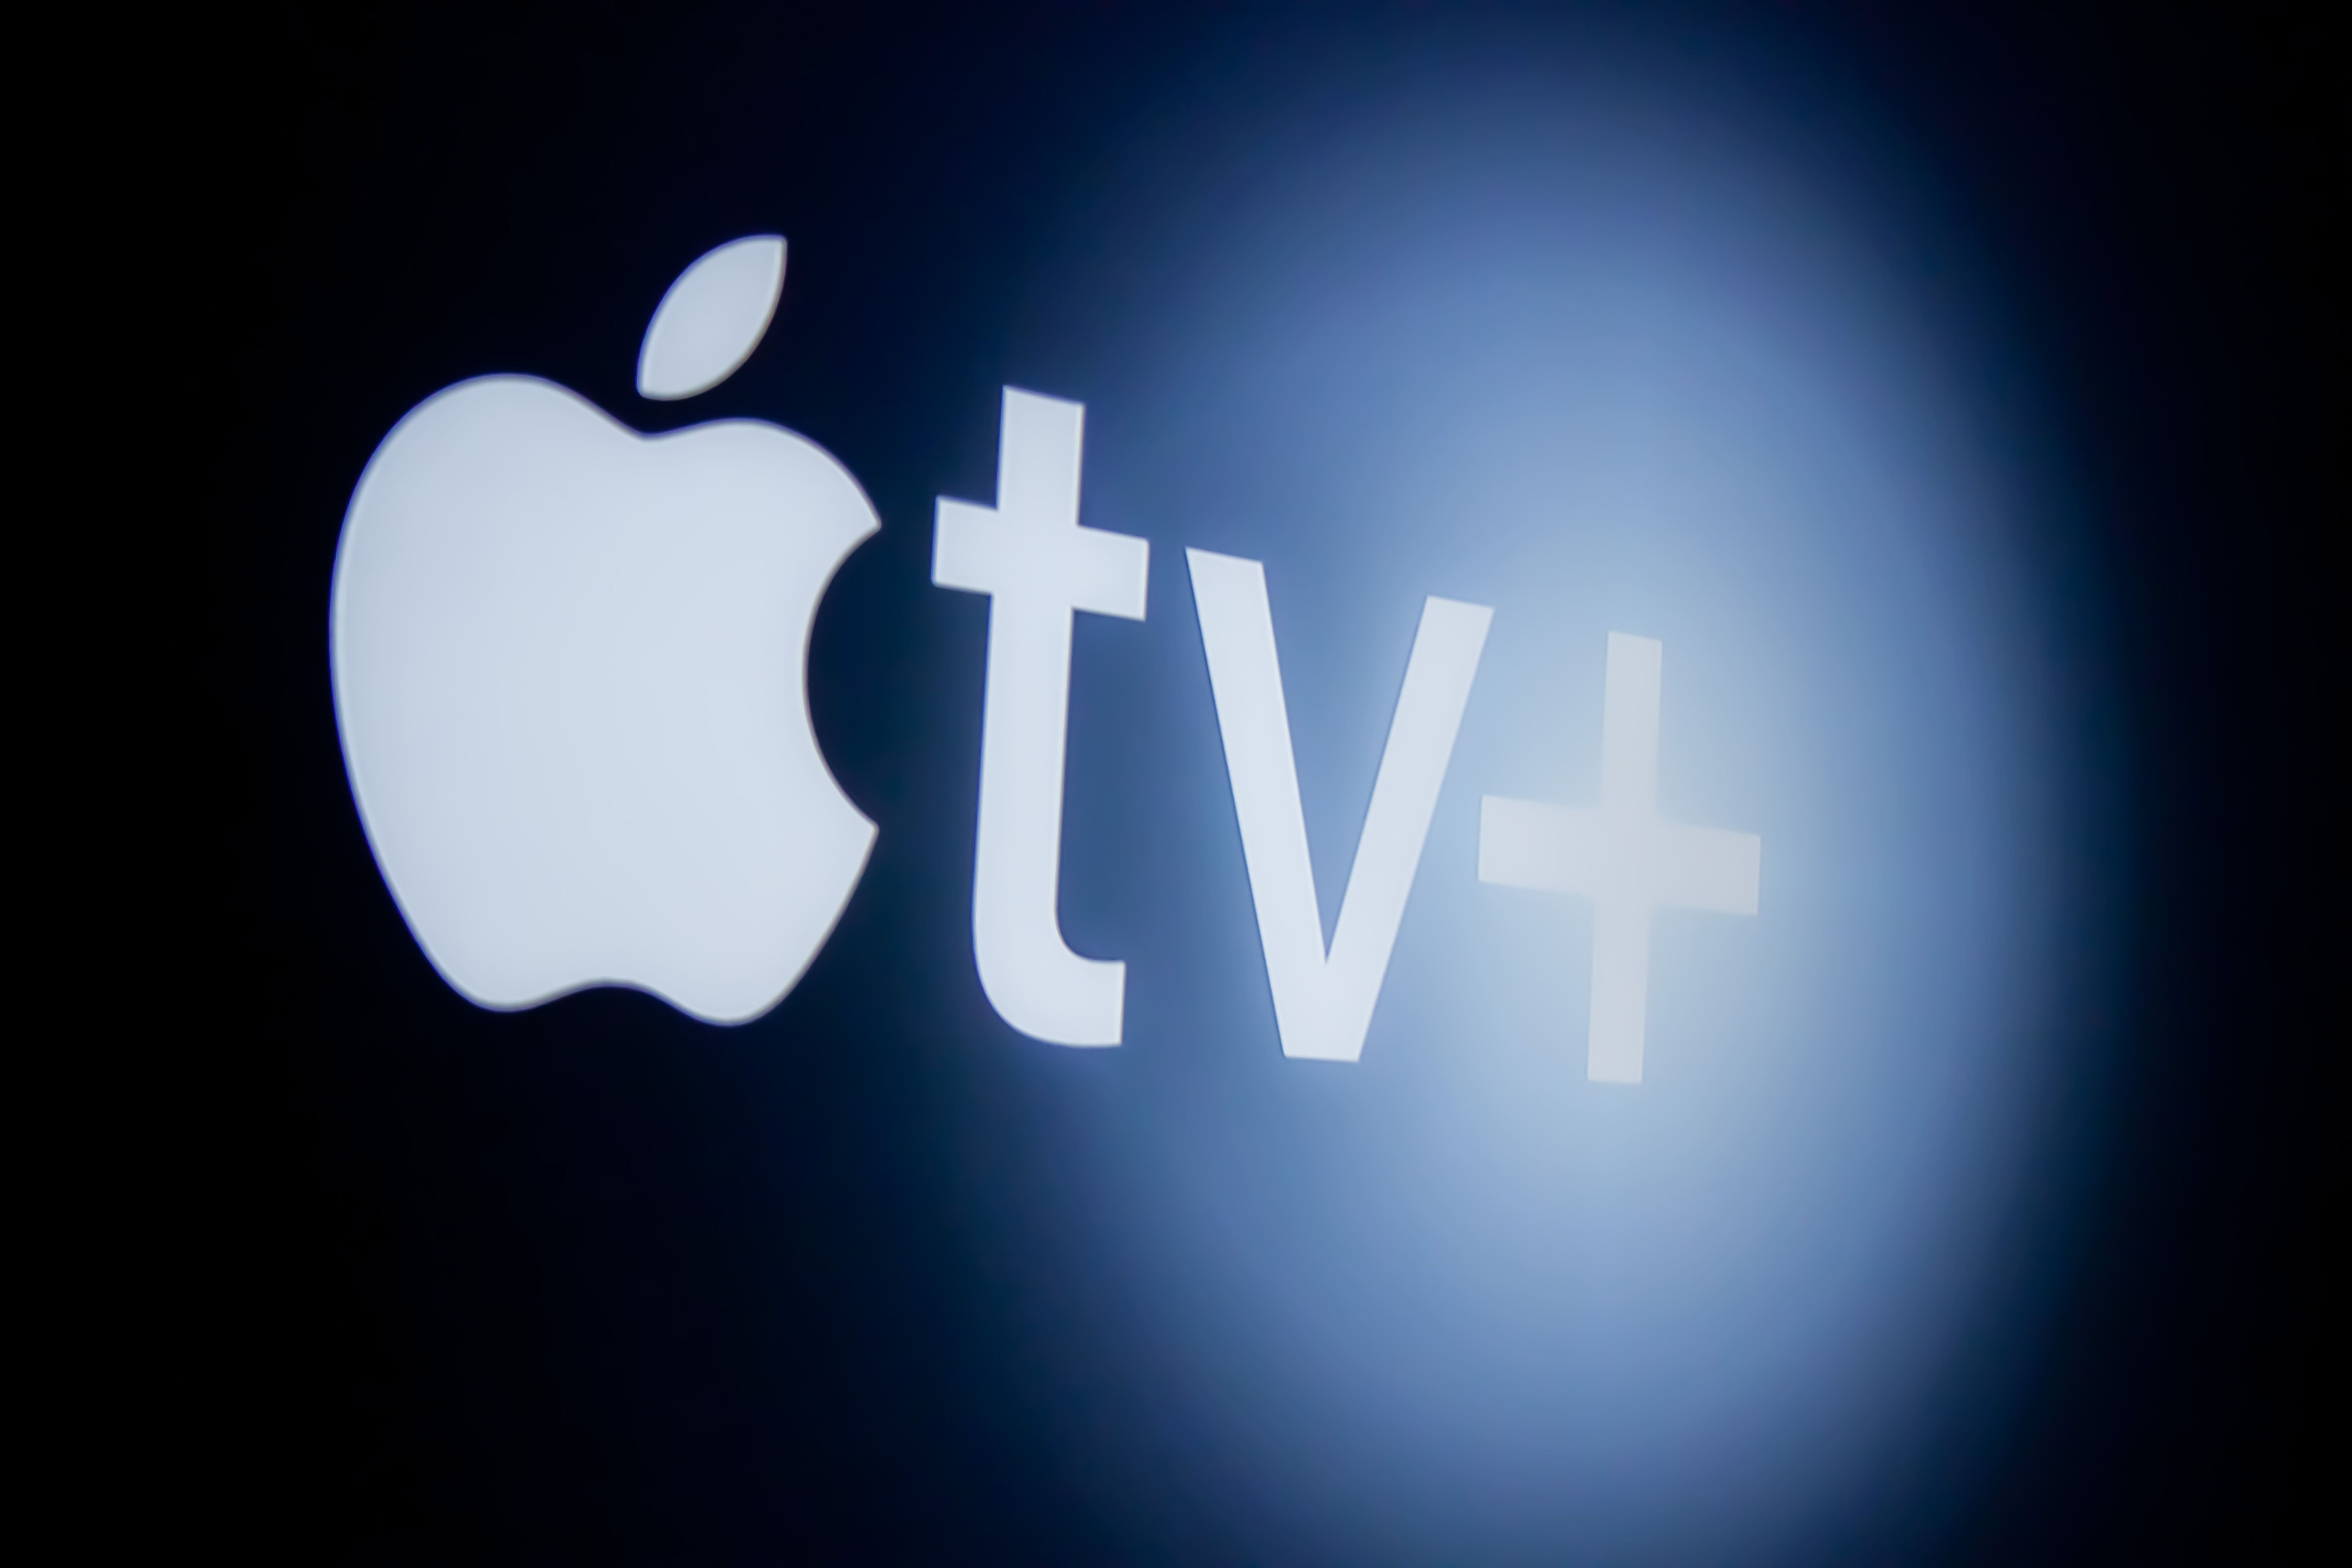 Apple Charts Big Plans For Apple TV+, Including Taking On Netflix, Disney+ and Amazon Prime